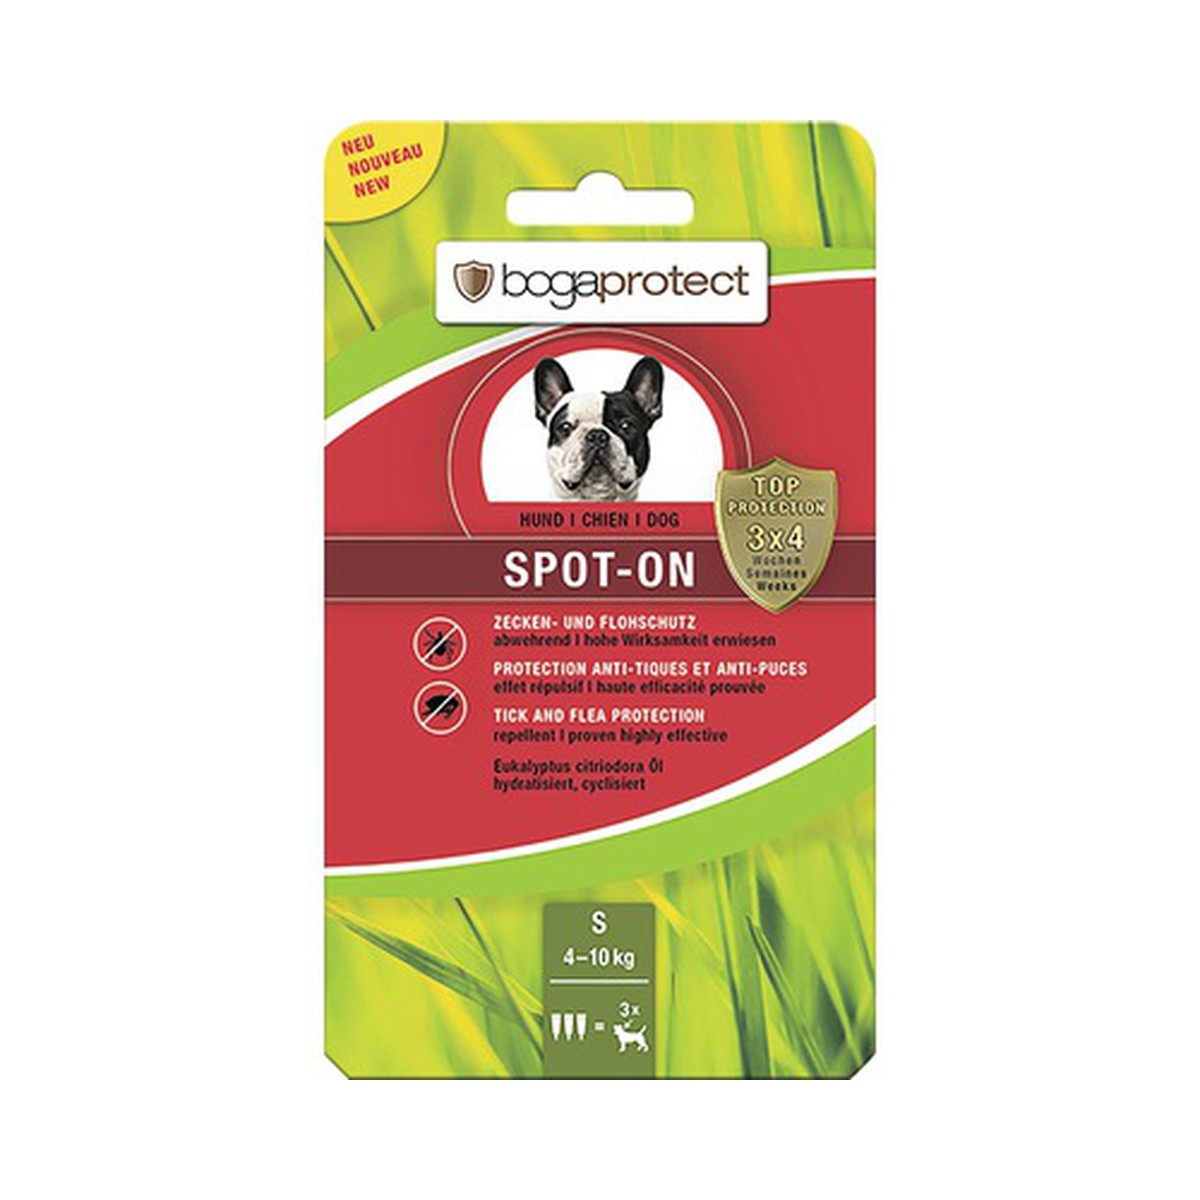   Bogaprotect Spot-On chien S  3x1.2ml